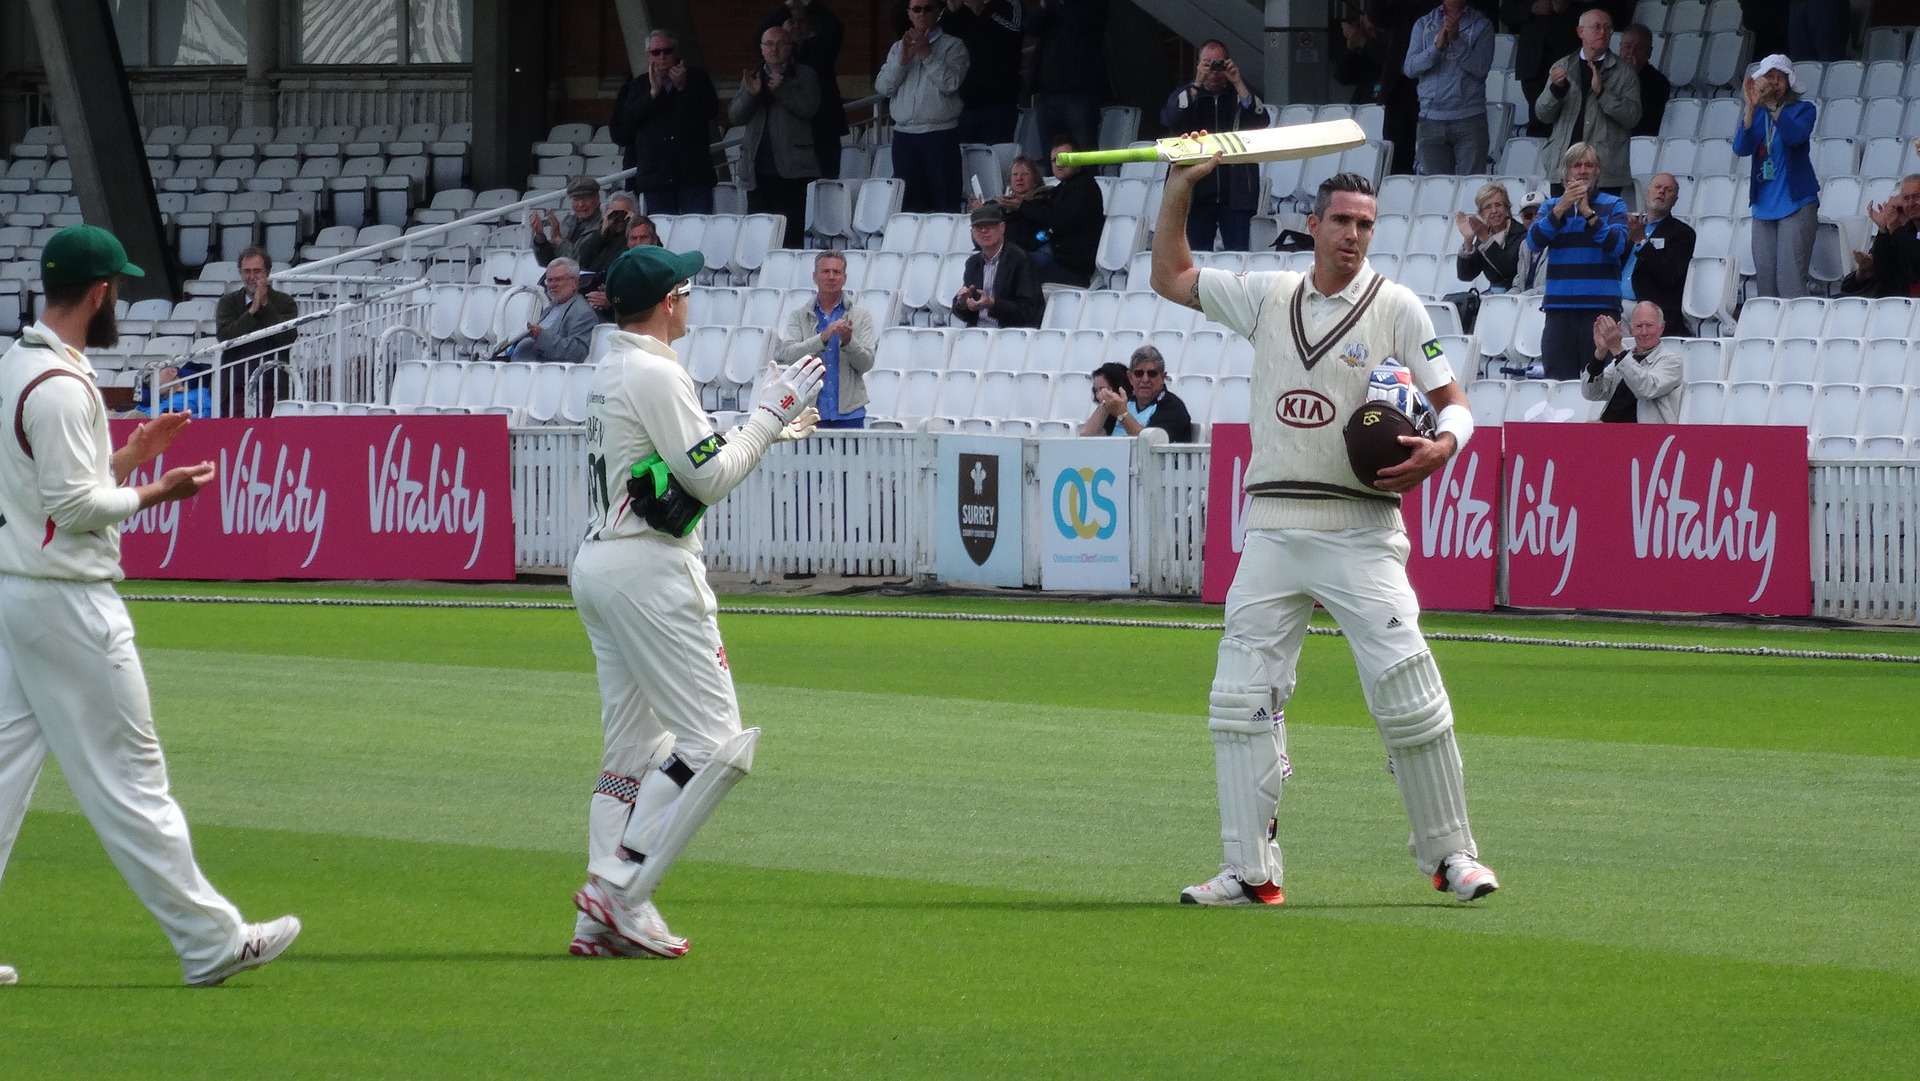 Kevin Pietersen playing for Surrey in the County Championship